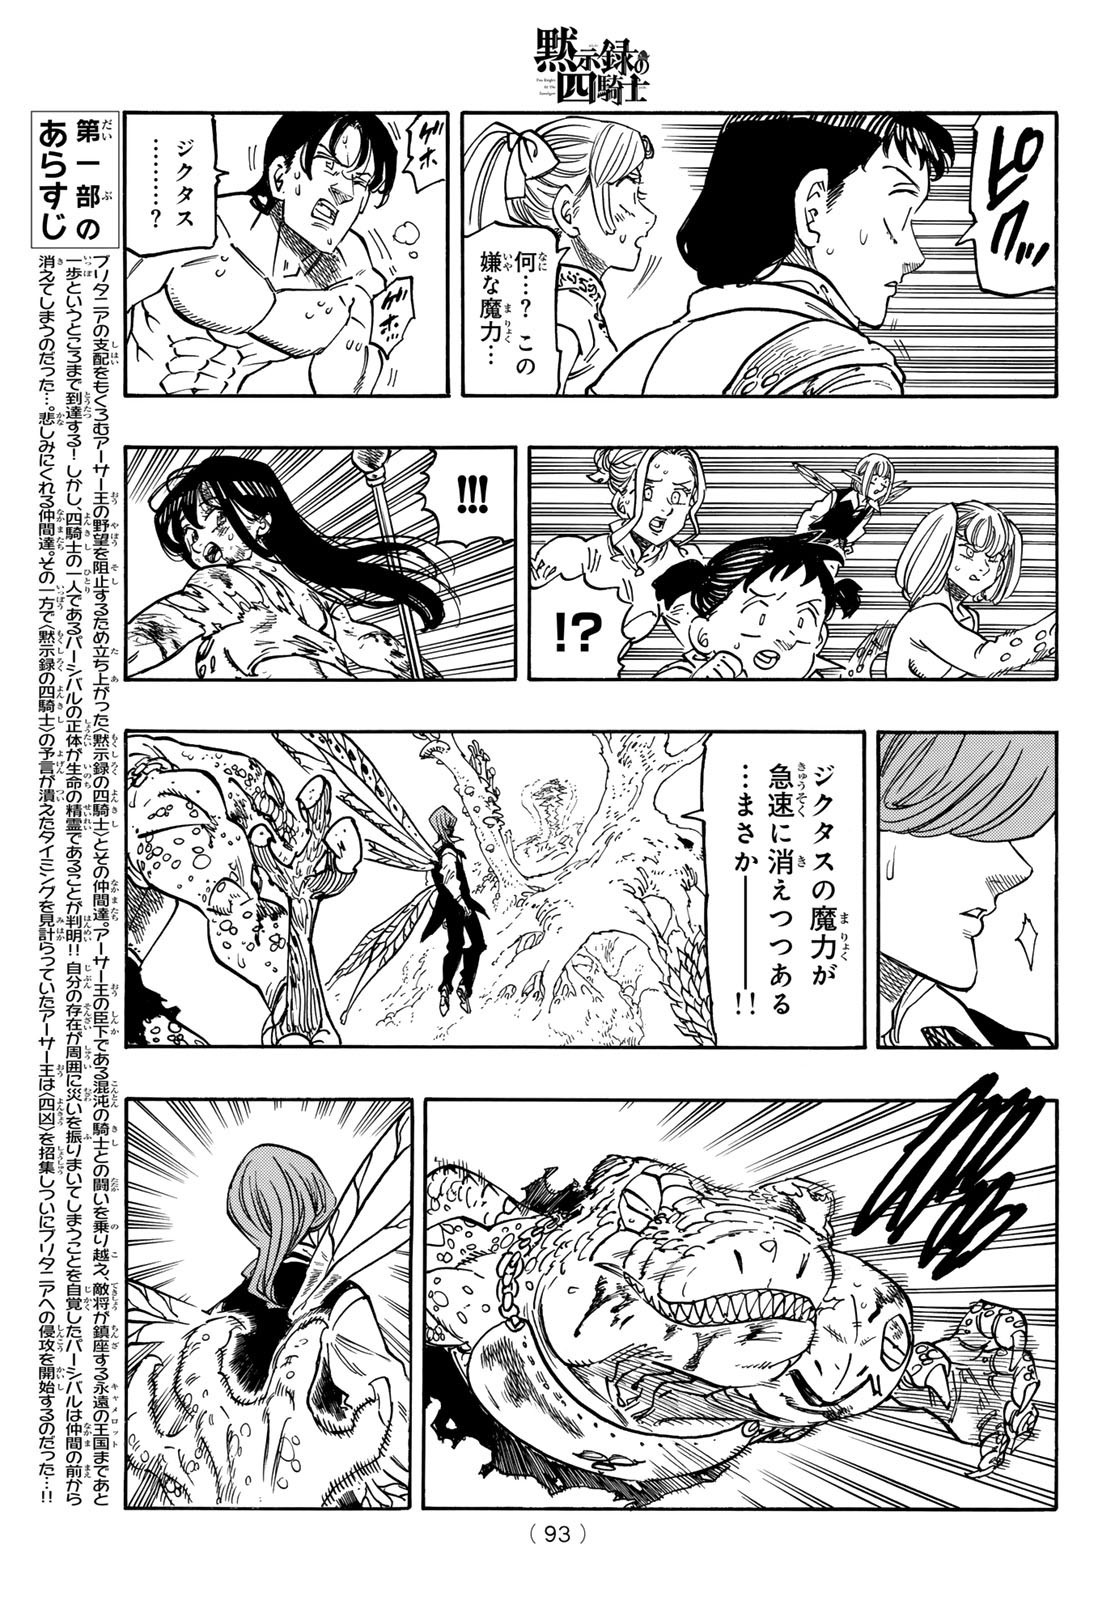 Weekly Shōnen Magazine - 週刊少年マガジン - Chapter 2024-23 - Page 91